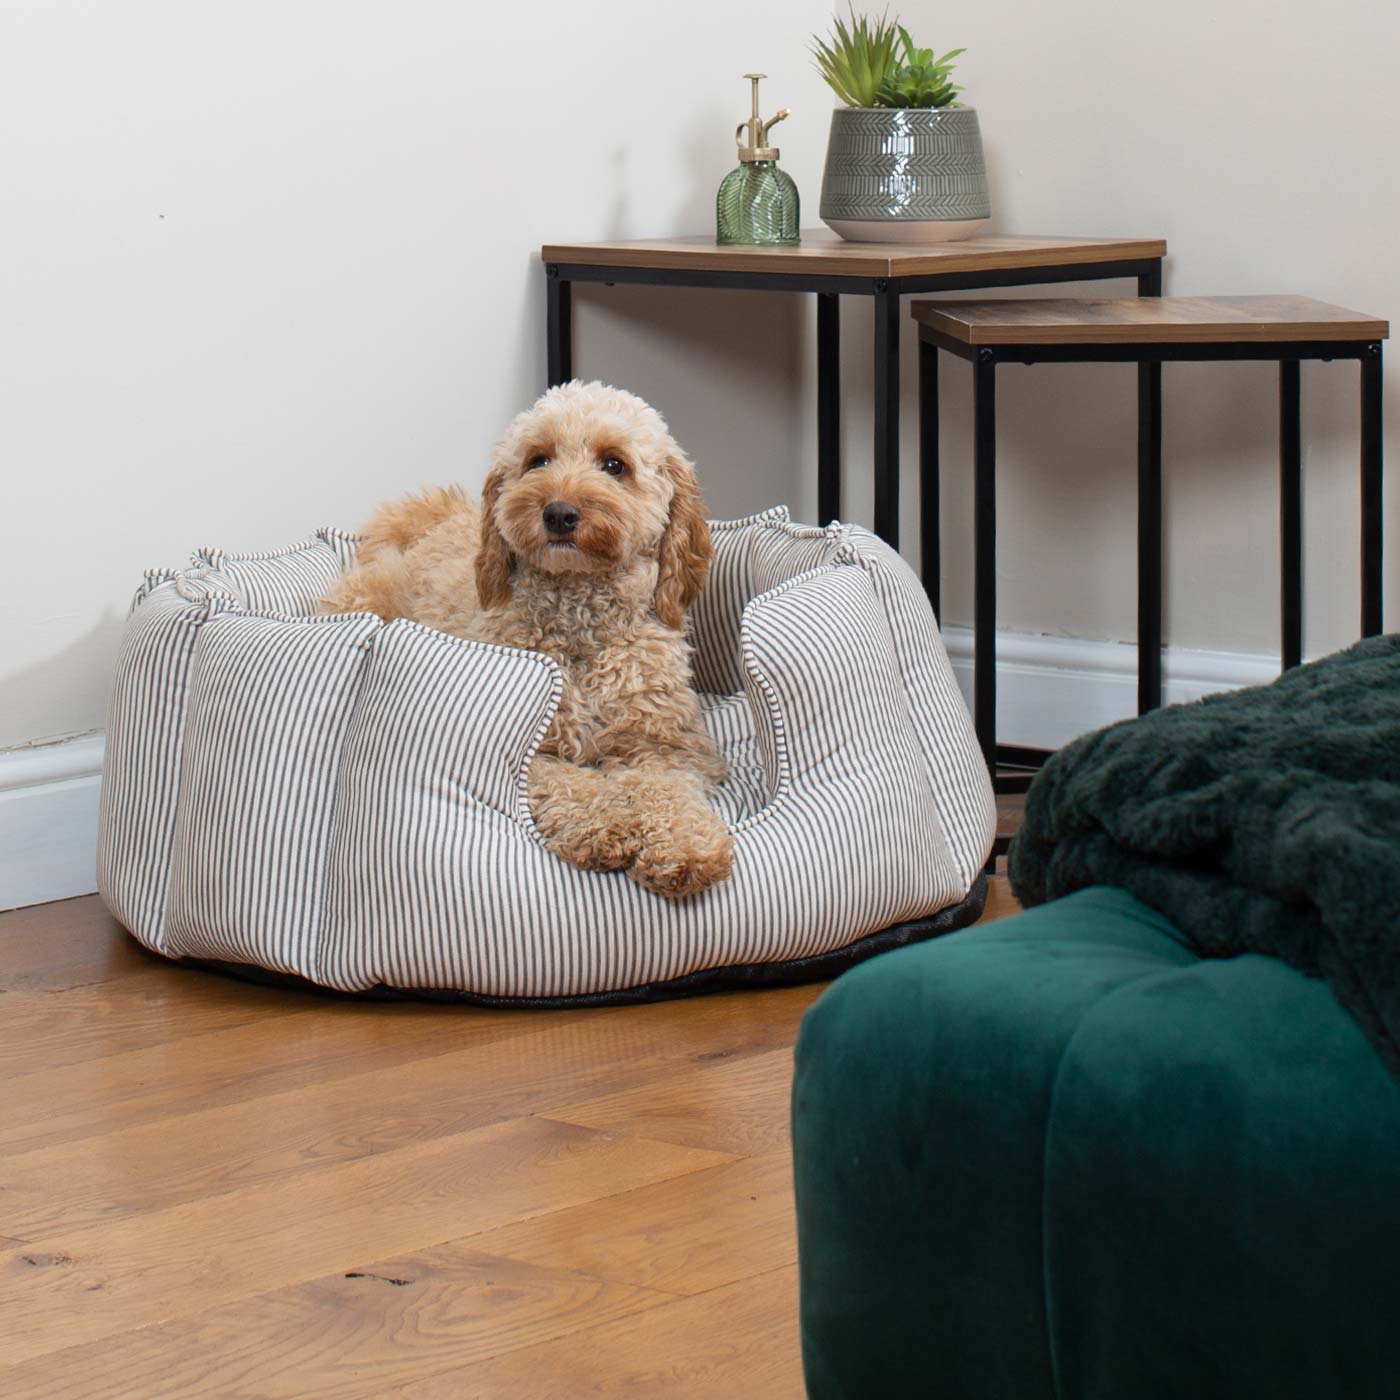 Discover Our Luxurious High Wall Bed For Dogs & Puppies, Featuring Reversible Inner Cushion With Teddy Fleece To Craft The Perfect Dog Bed In Stunning Regency Stripe! Available To Personalise Now at Lords & Labradors 